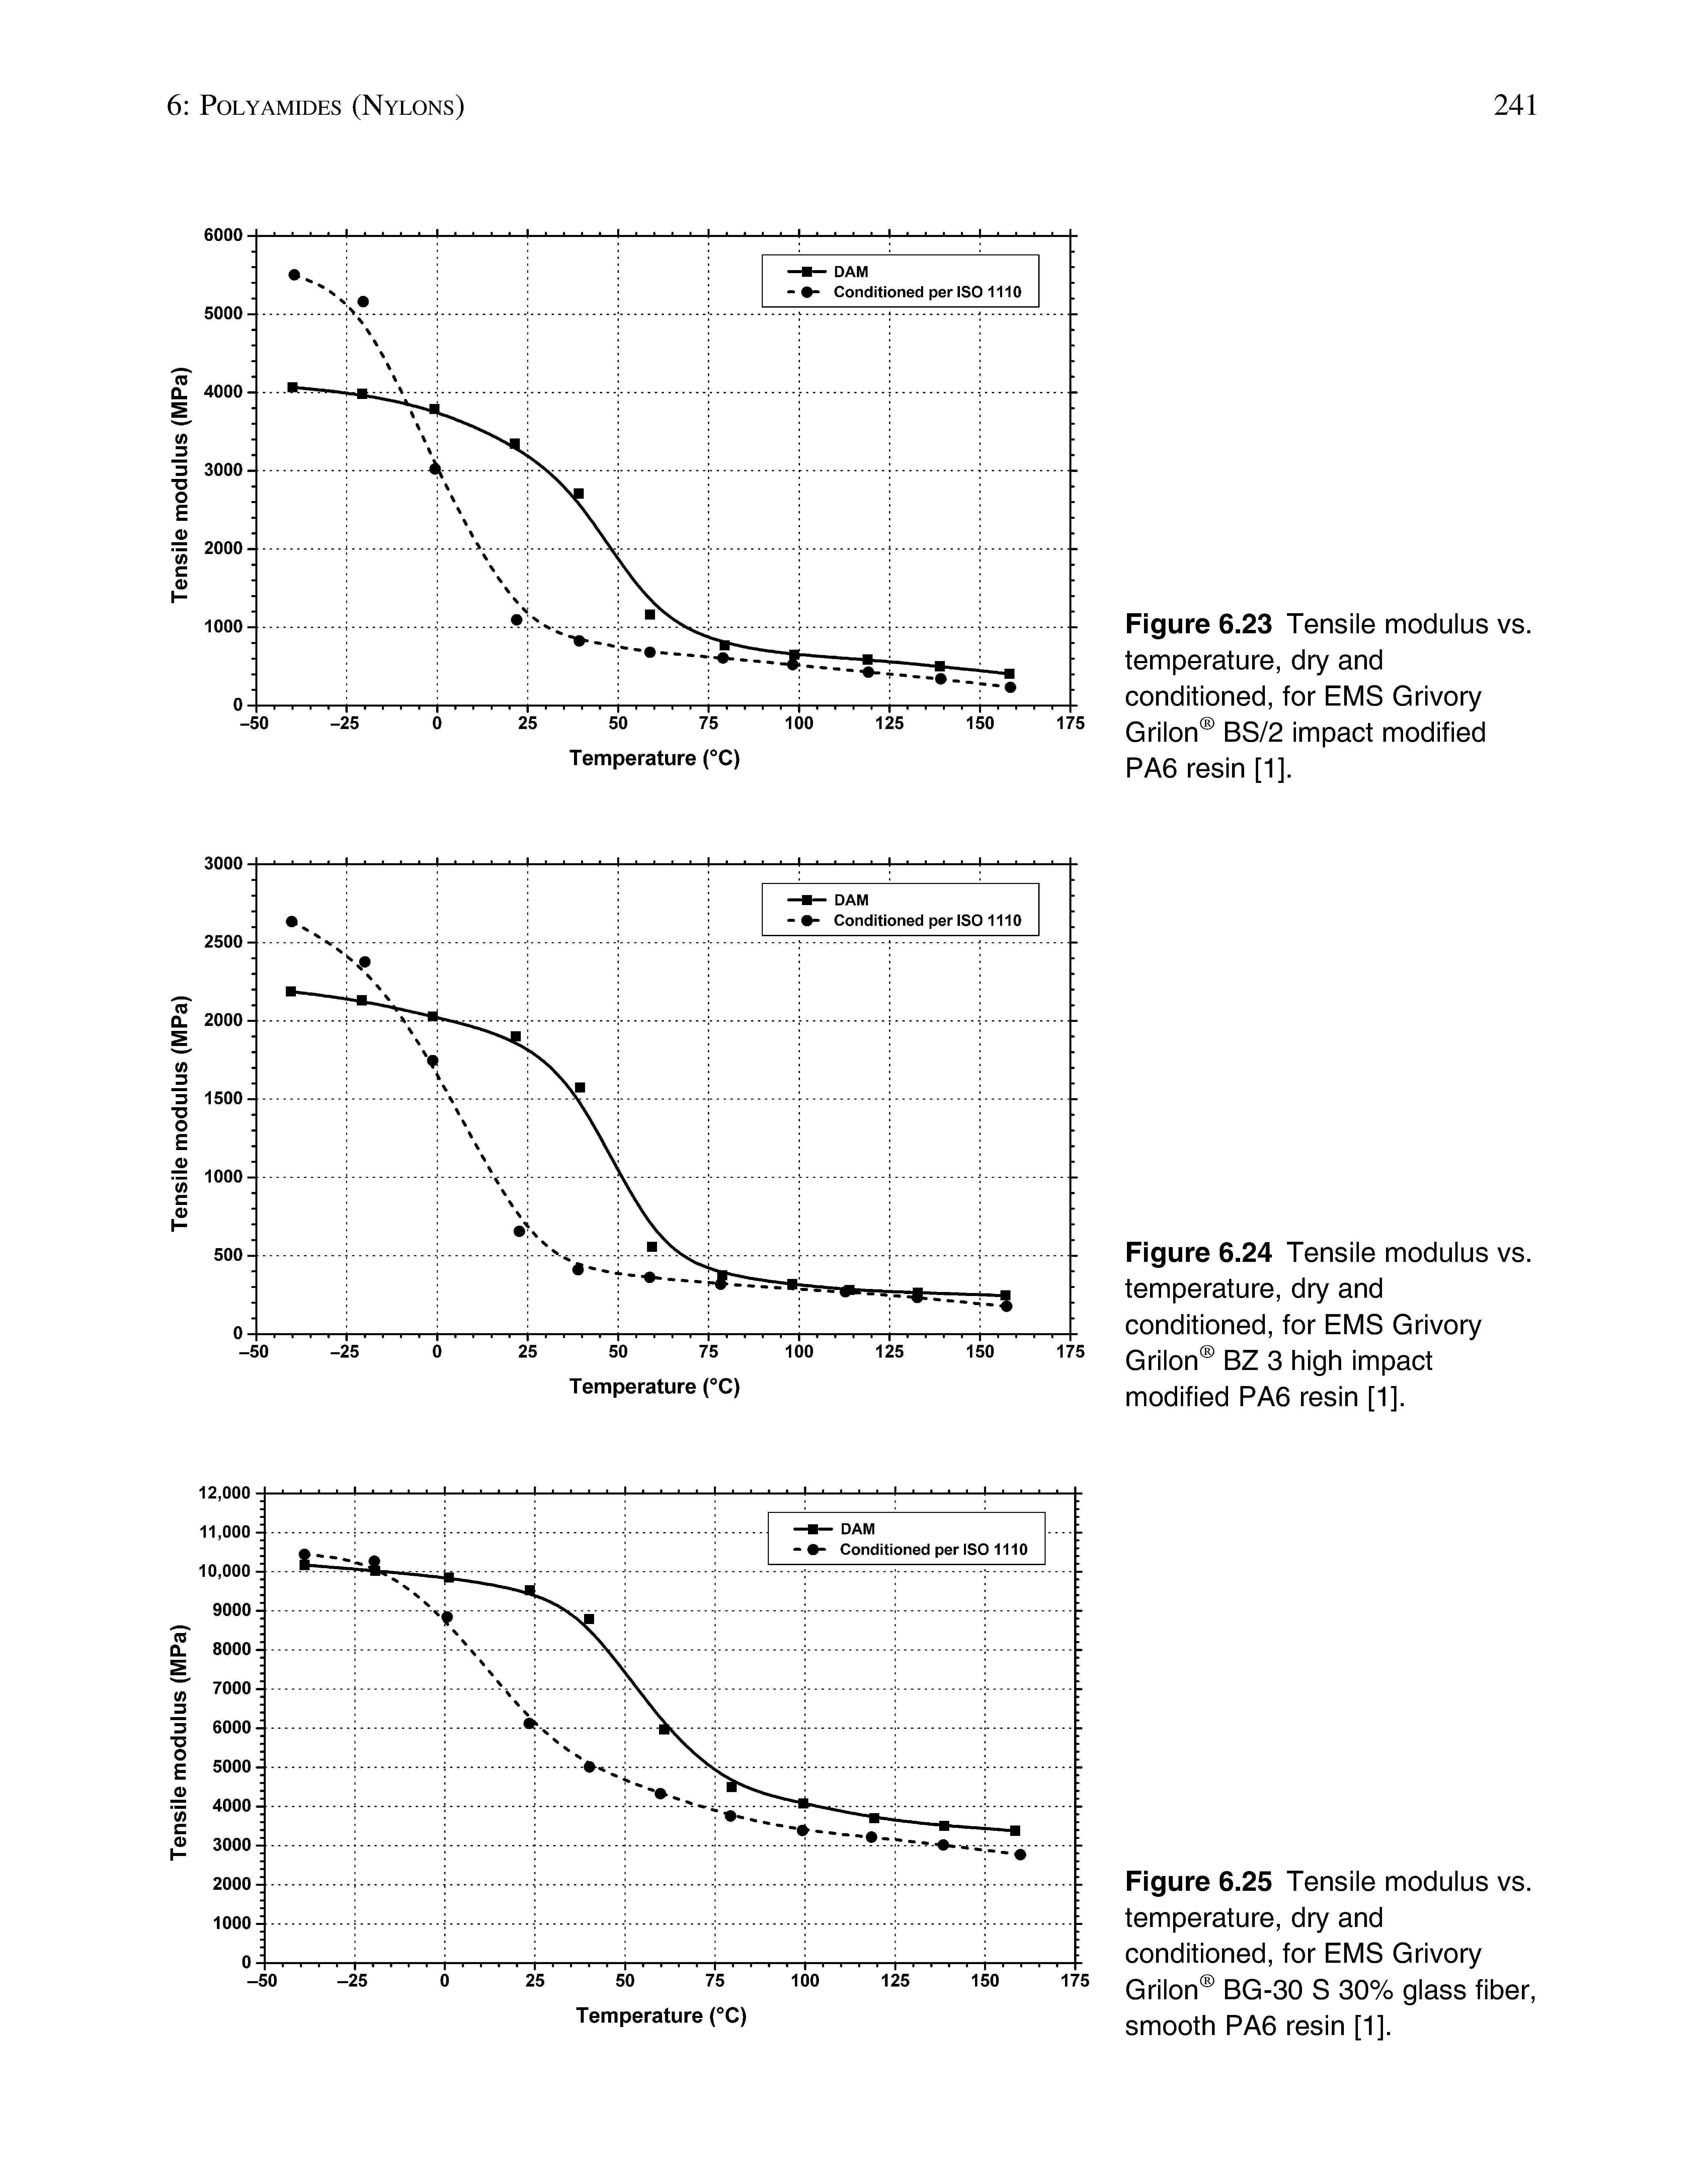 Figure 6.24 Tensile modulus vs. temperature, dry and conditioned, for EMS Grivory Grilon BZ 3 high impact modified PAG resin [1].